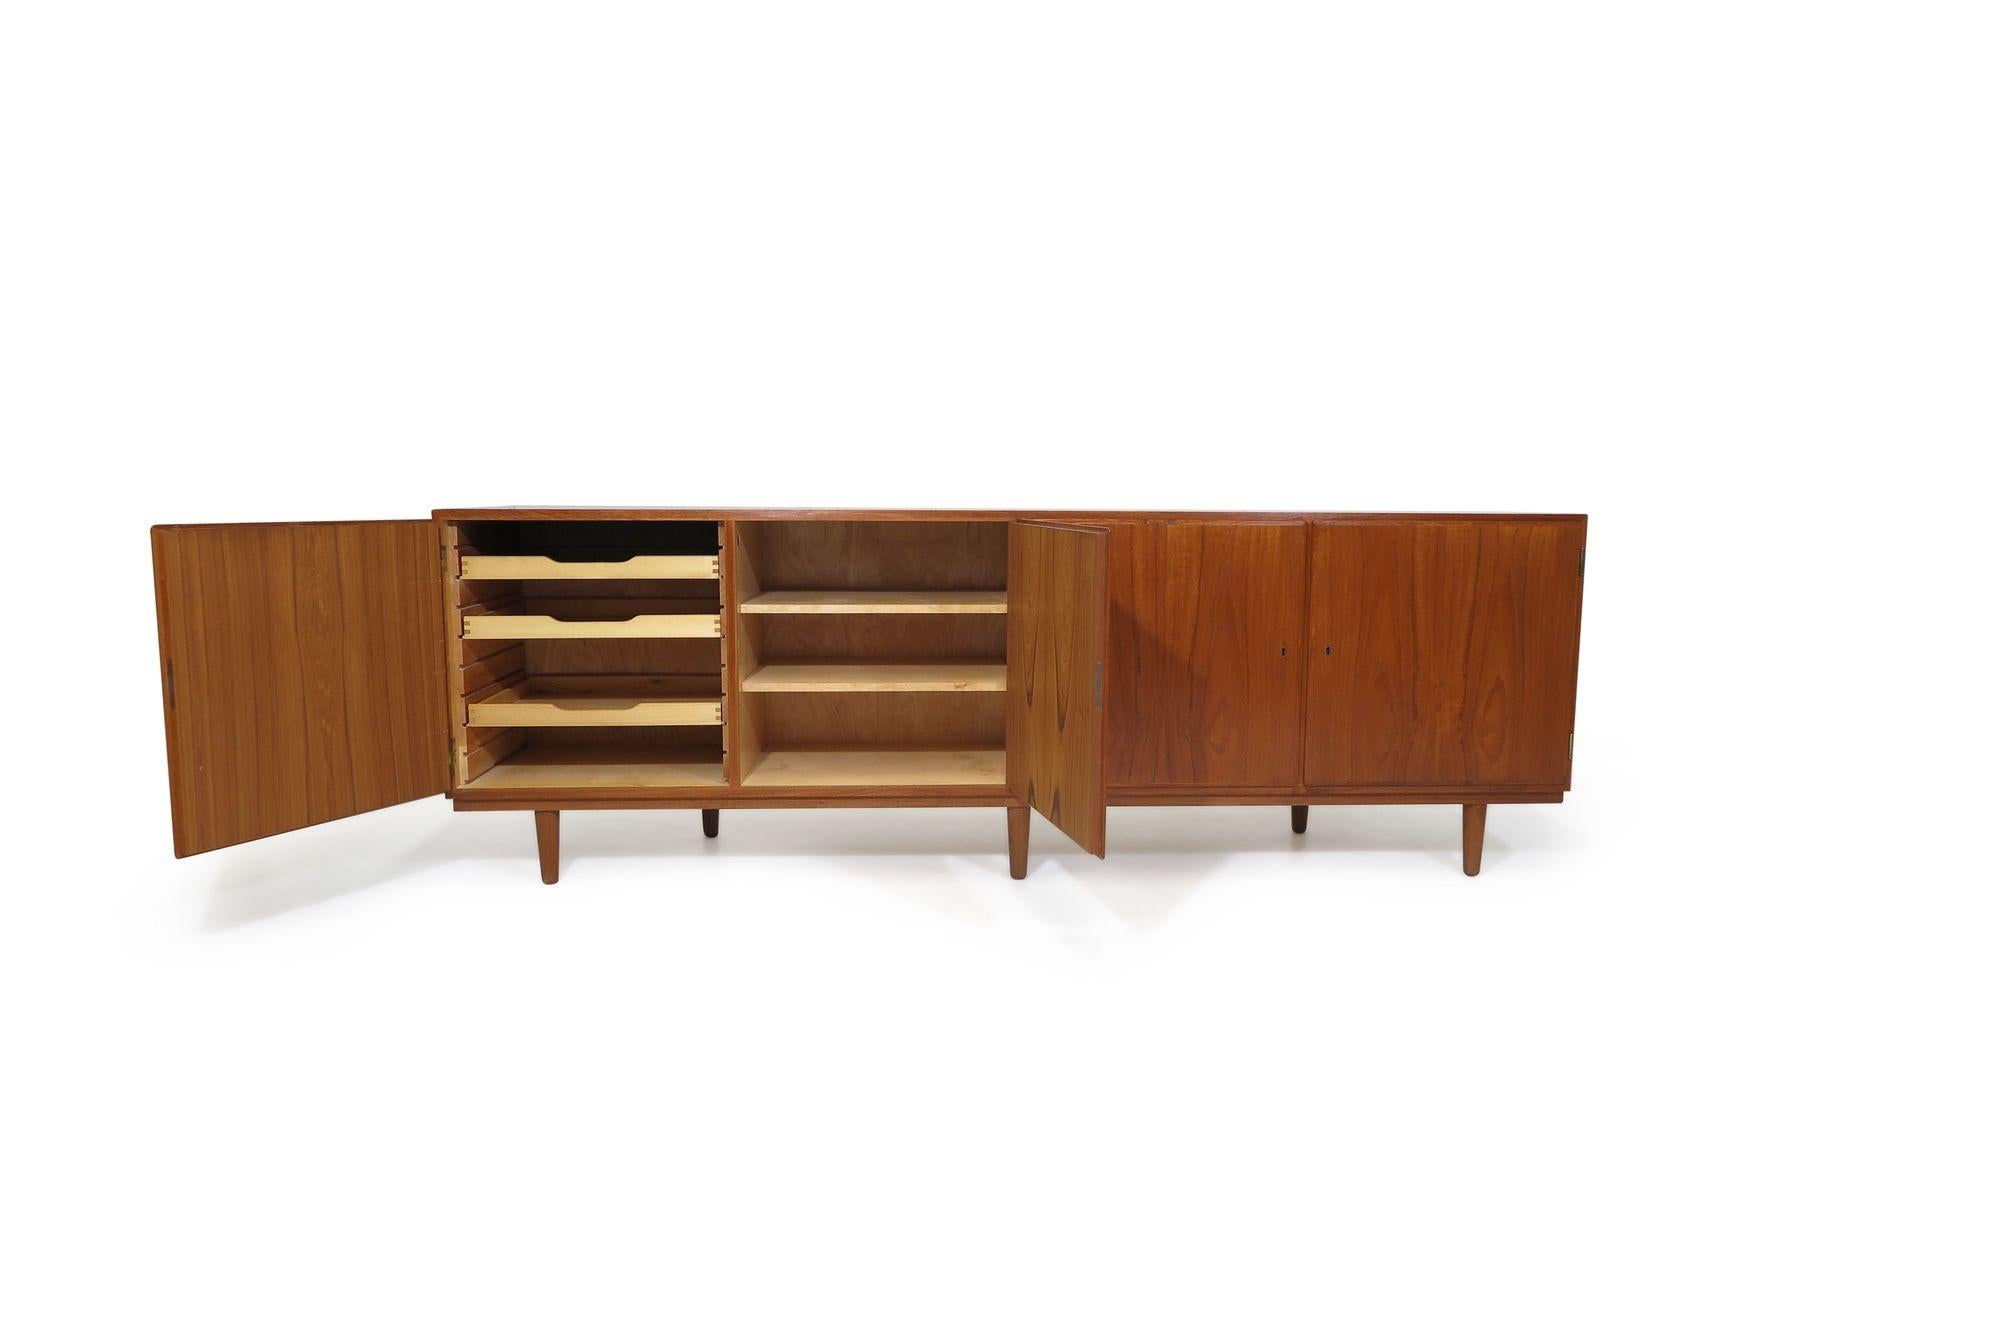 Mid-century Danish teak cabinet designed by Poul Hundevad with four locking book-matched doors opening to reveal an interior of beech with adjustable shelves and three silverware drawers on left side. The cabinet is raised on tapered legs.